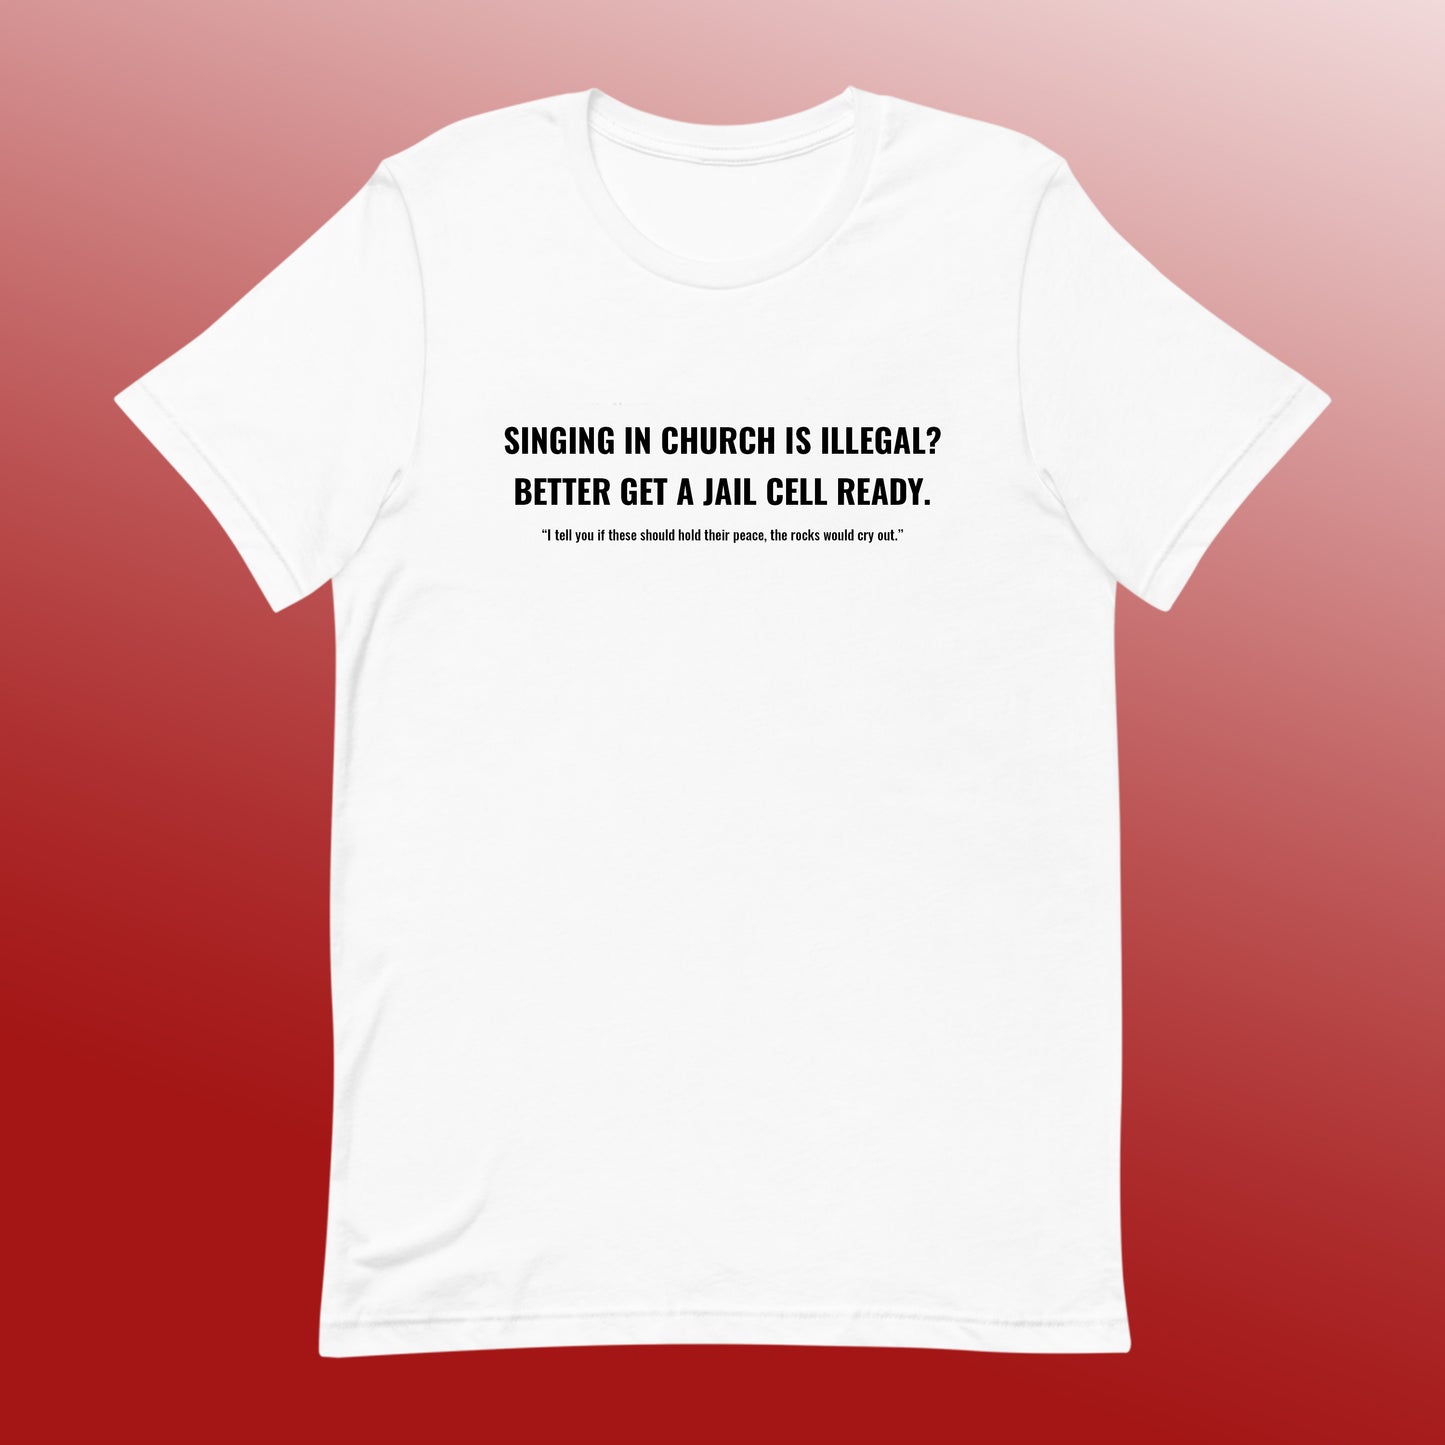 "Singing in Church is Illegal?" T-Shirt